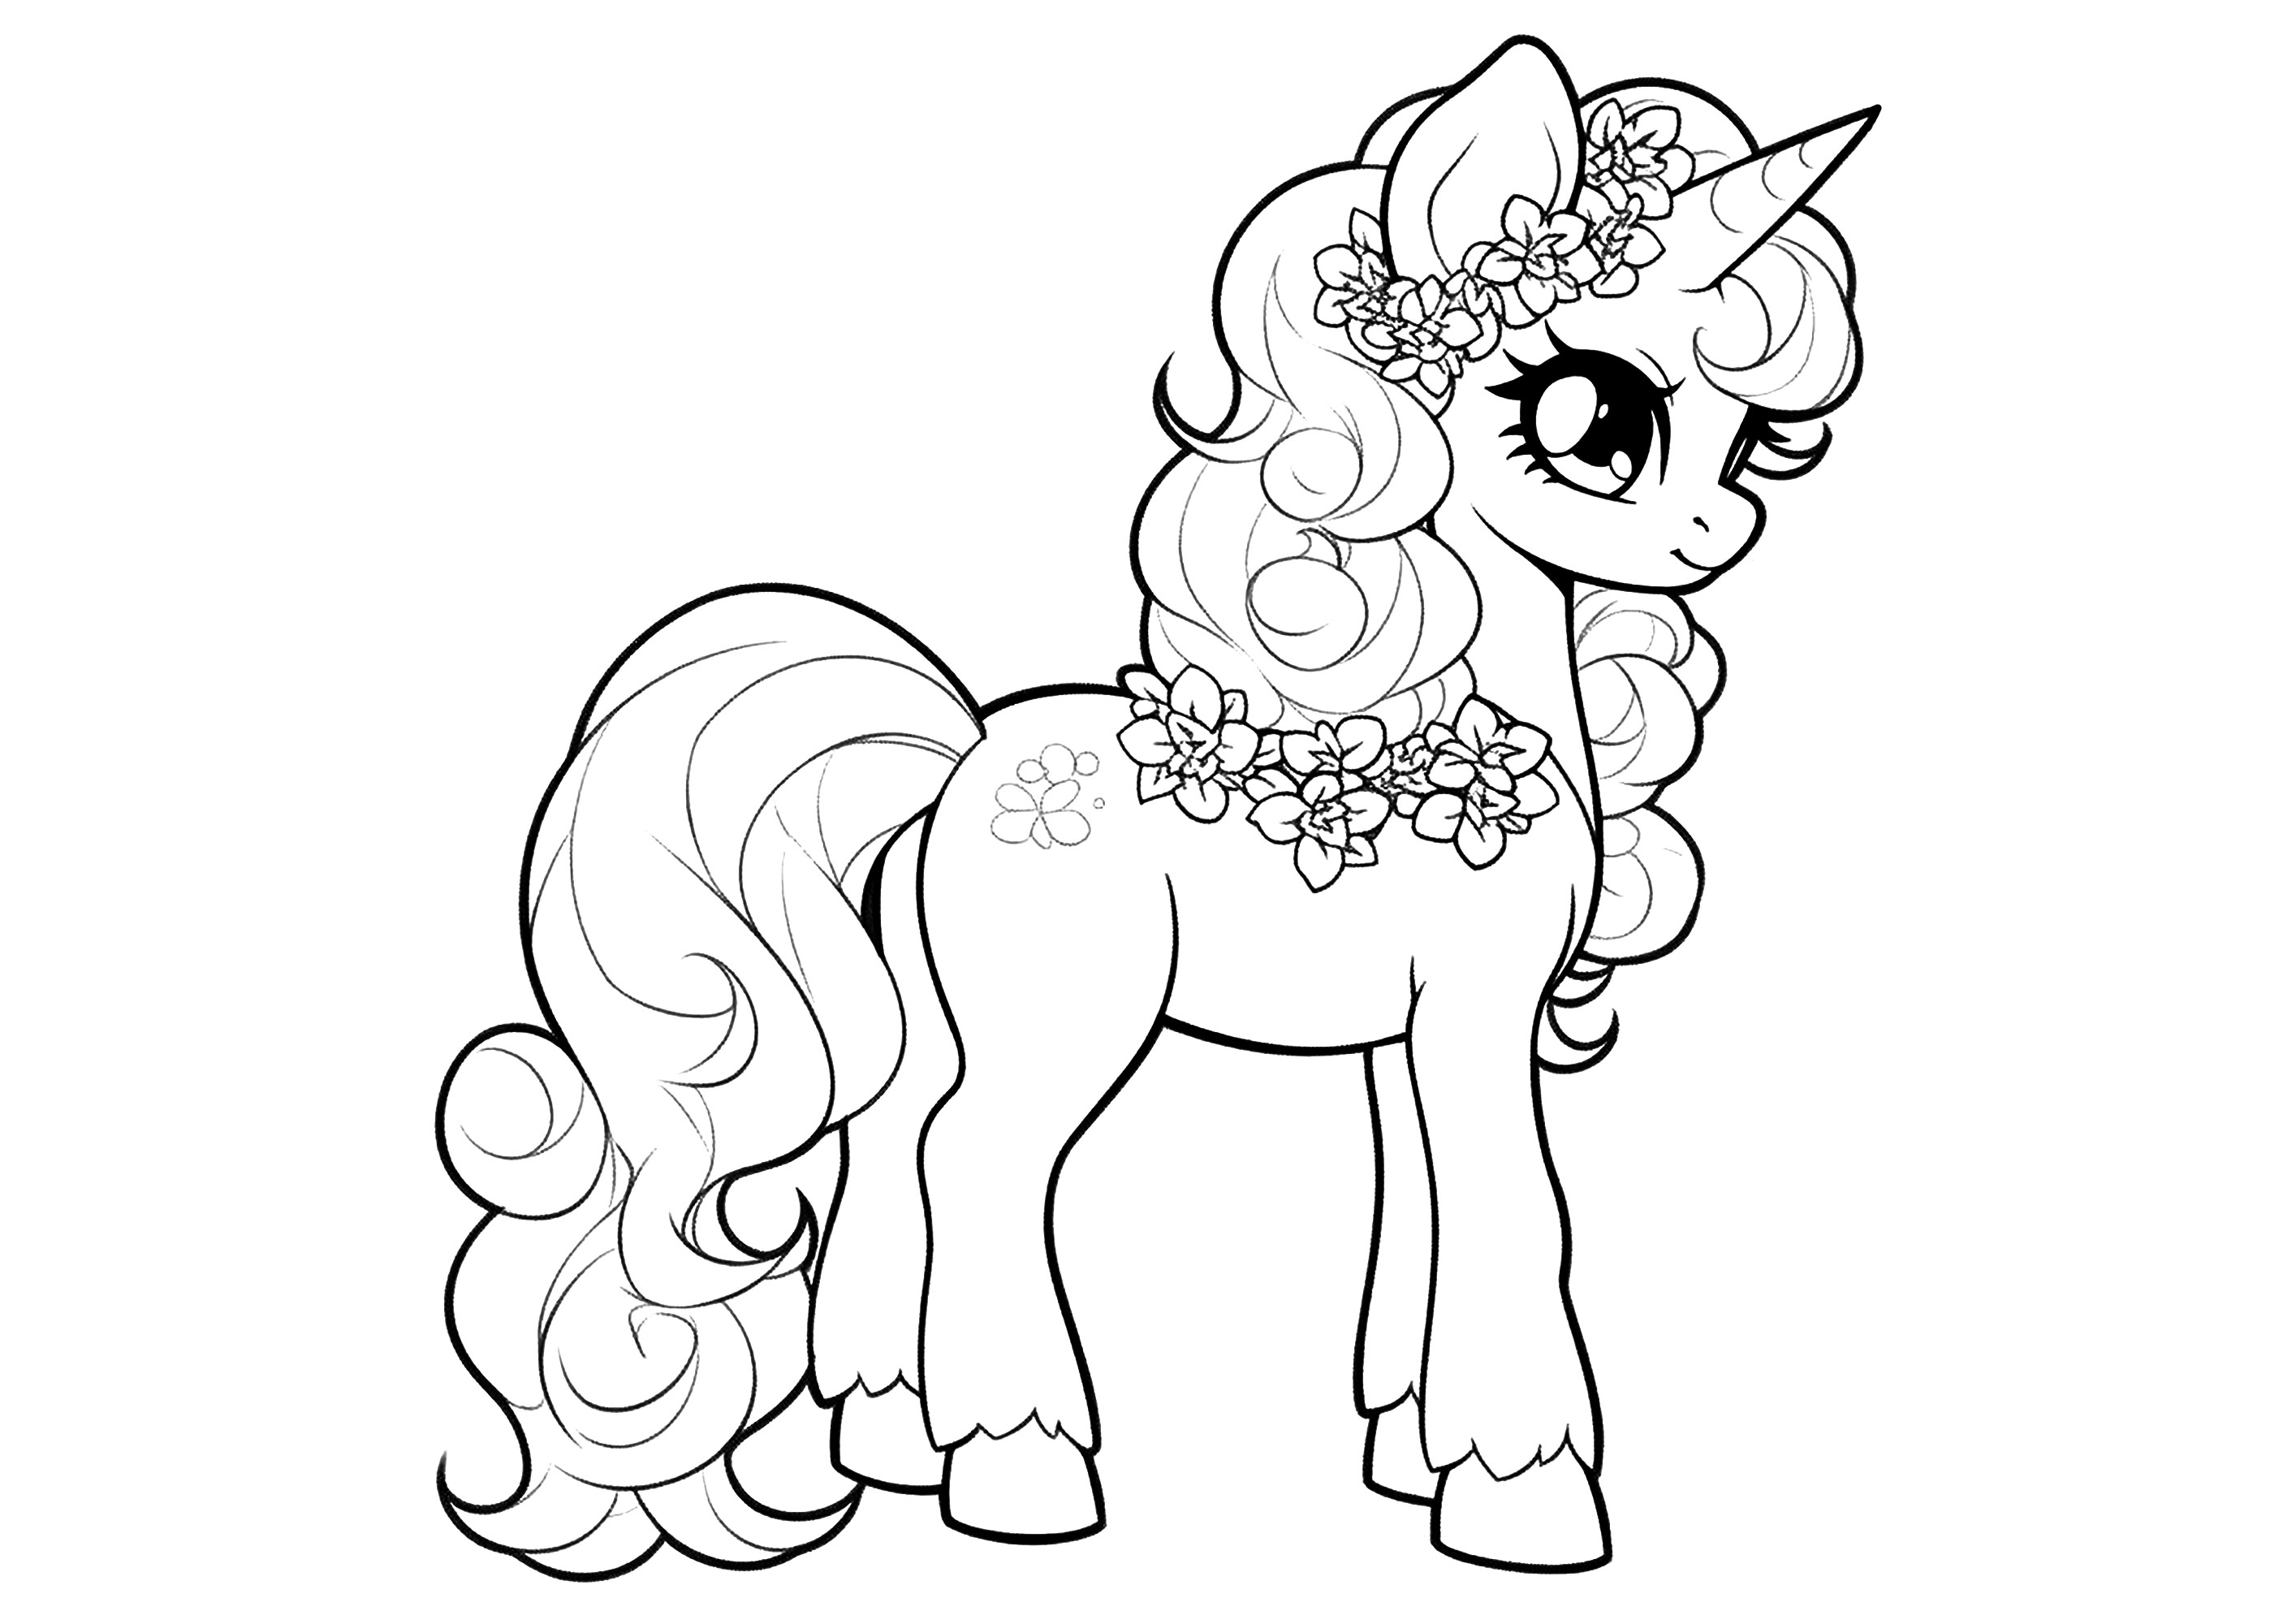 Little Pony with a flower necklace